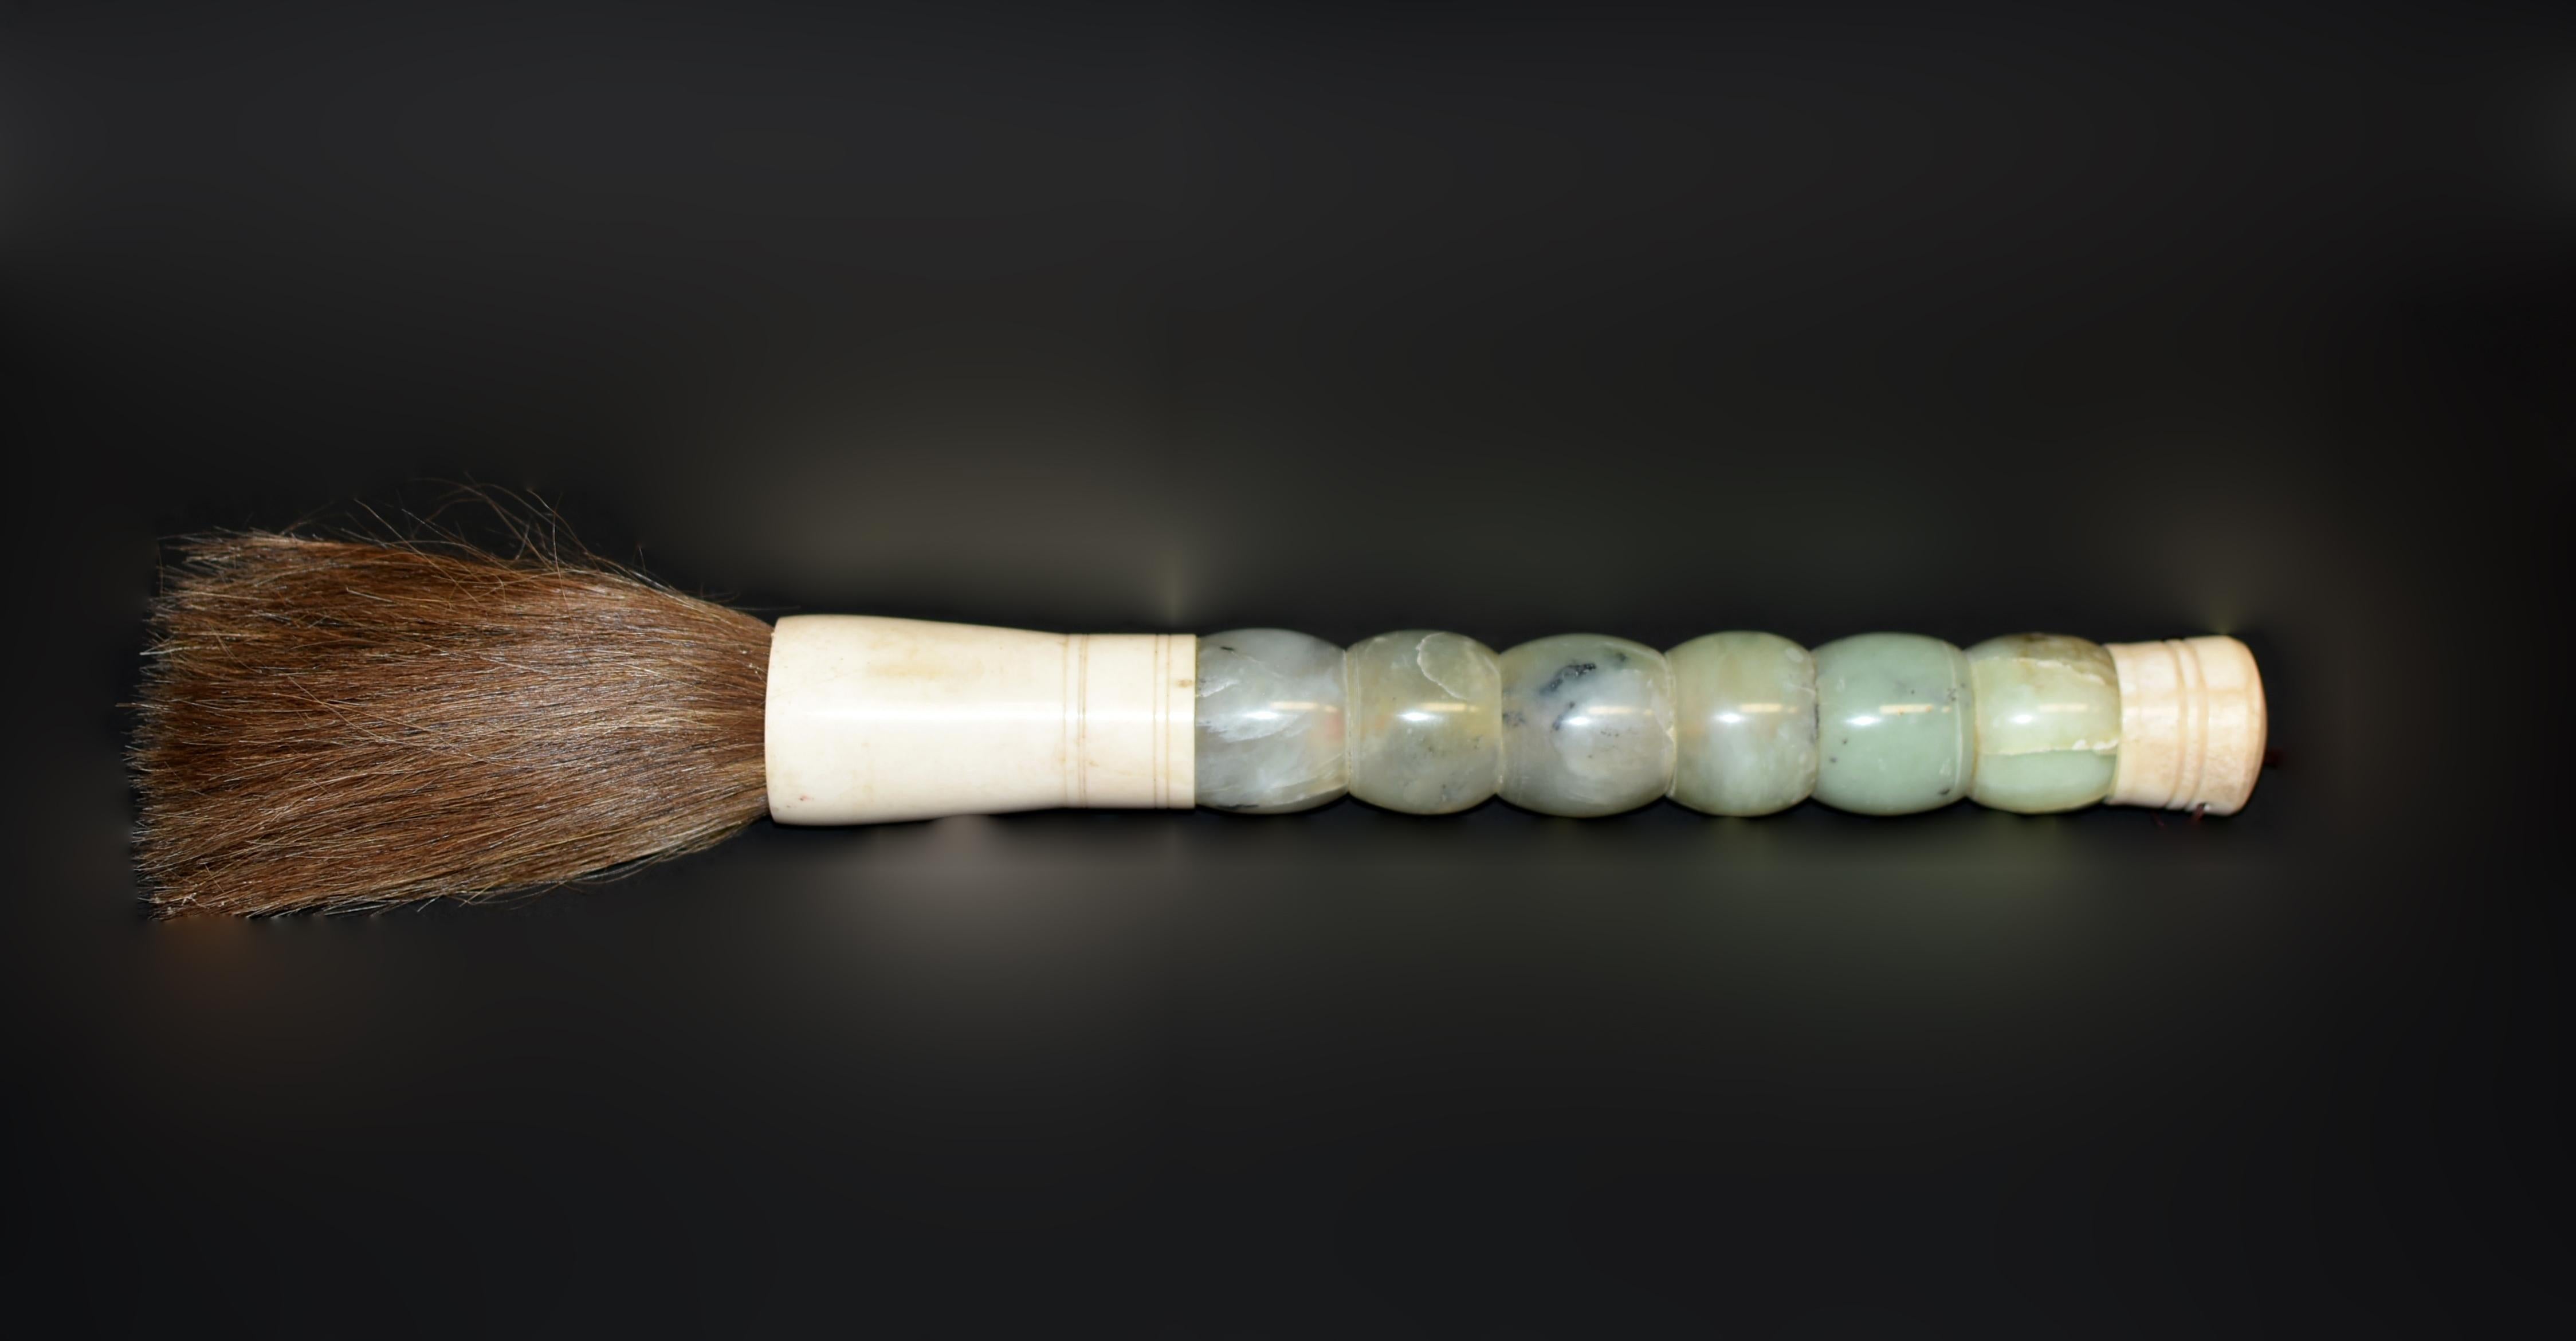 A testament to traditional craftsmanship, this large Chinese calligraphy brush is skillfully handcrafted with beautiful large serpentine barrel beads. The carefully chosen gemstone serpentine used in its construction features natural inclusions,